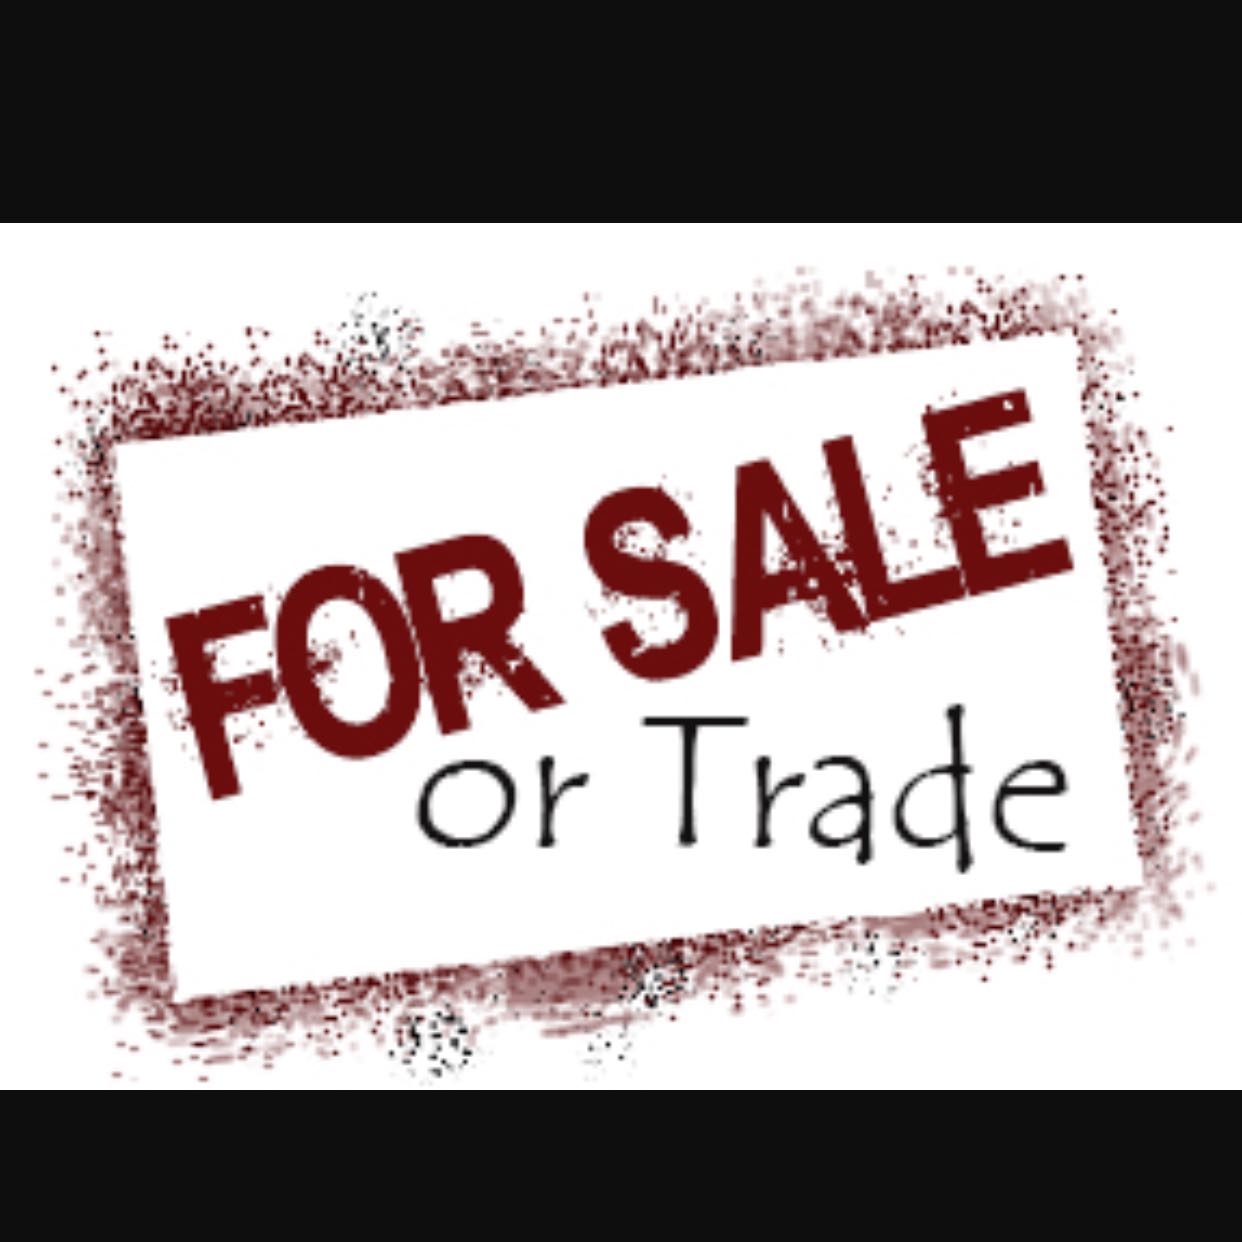 Ru sales group. Trade sale. Page for sale.